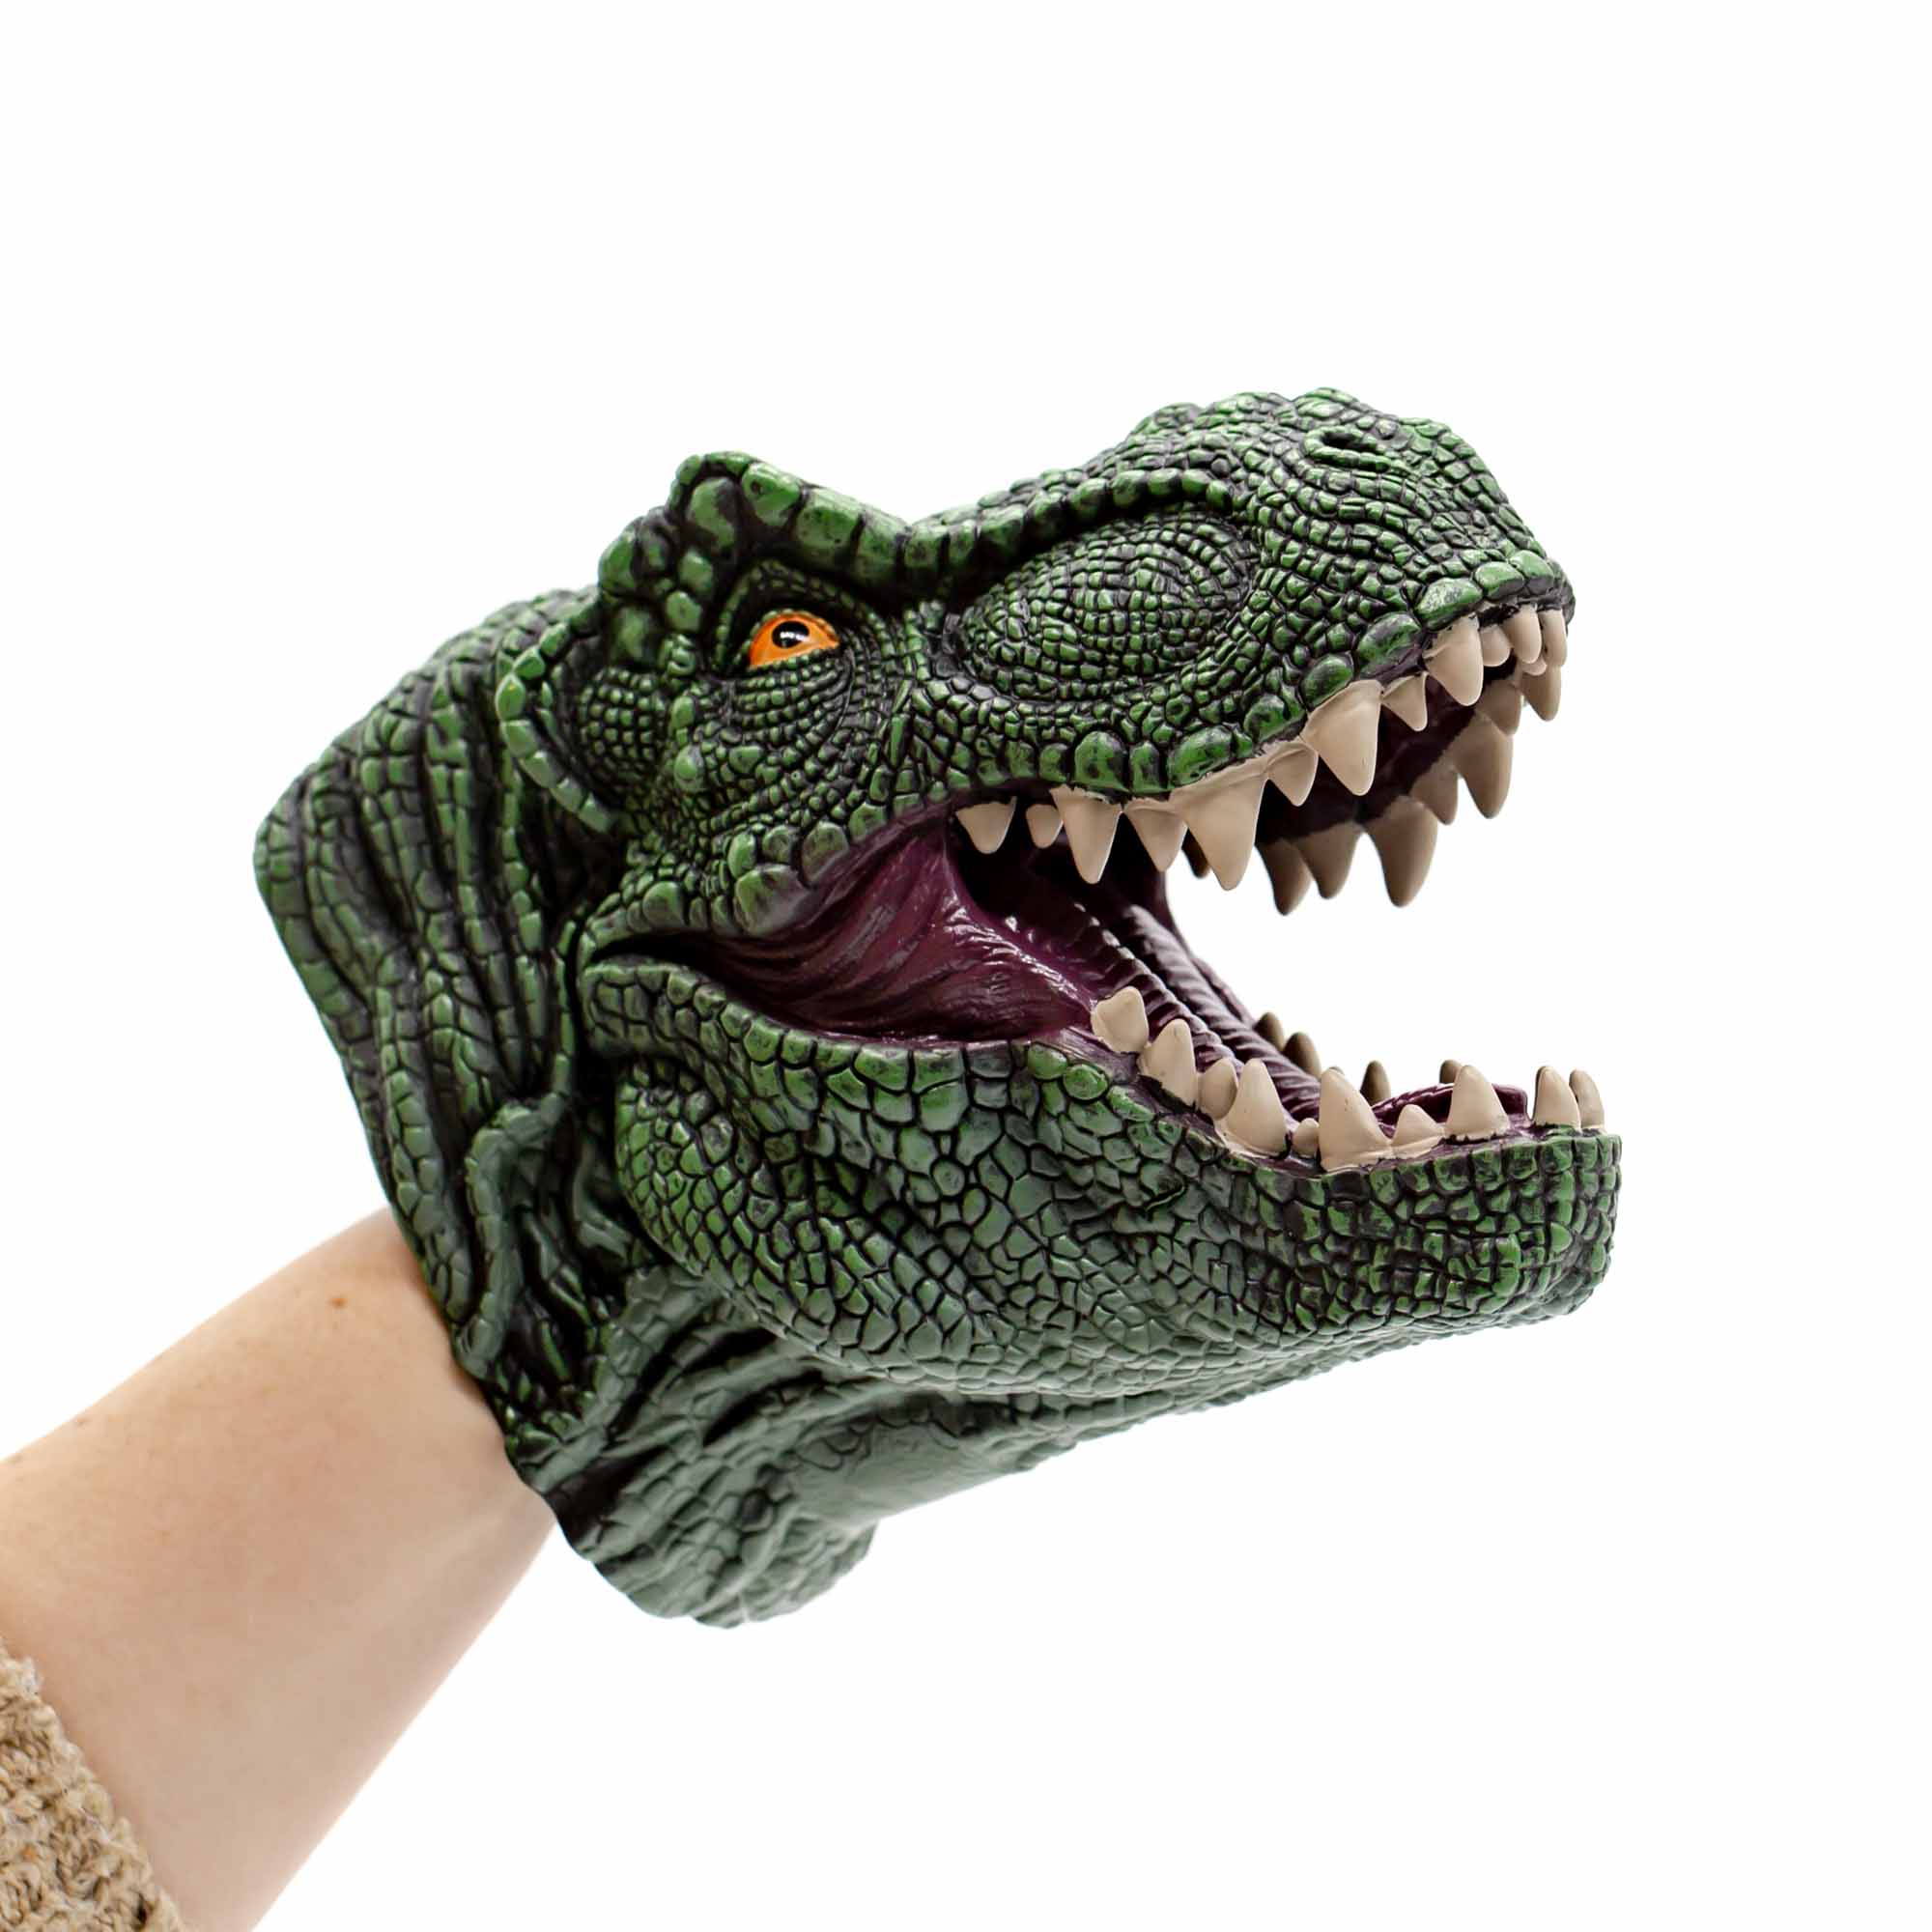 Realistic Dino Hand Puppet - Mortise And Tenon